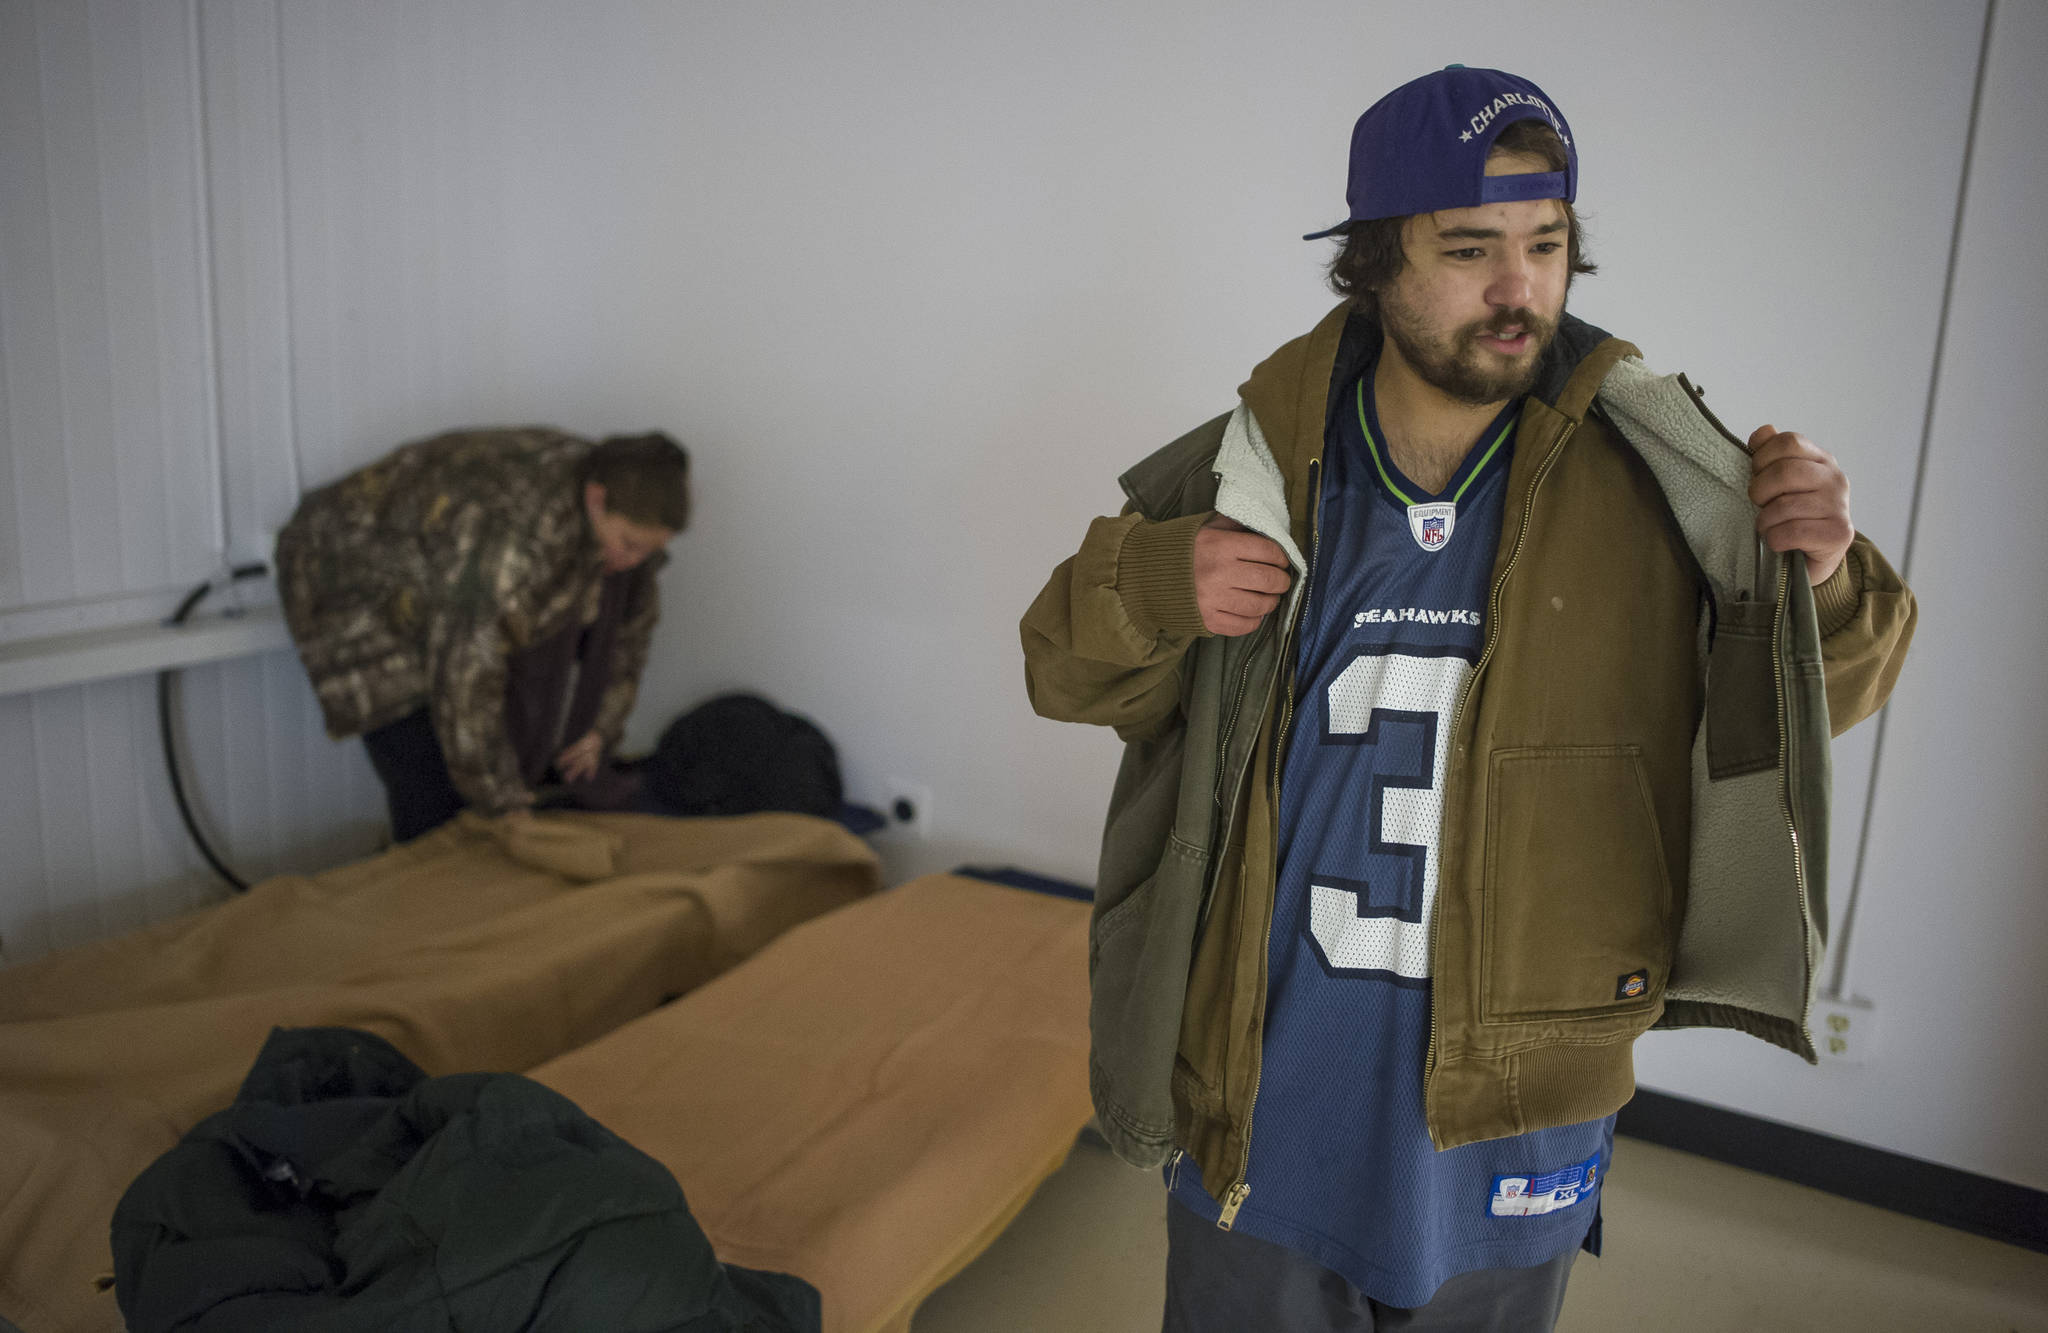 Chris King, 26, and his girlfriend, Chellsy Melton, 32, set up their cots at a new warming shelter in the old Public Safety Building on Whittier Street on Friday, Dec. 1, 2017. (Michael Penn | Juneau Empire)